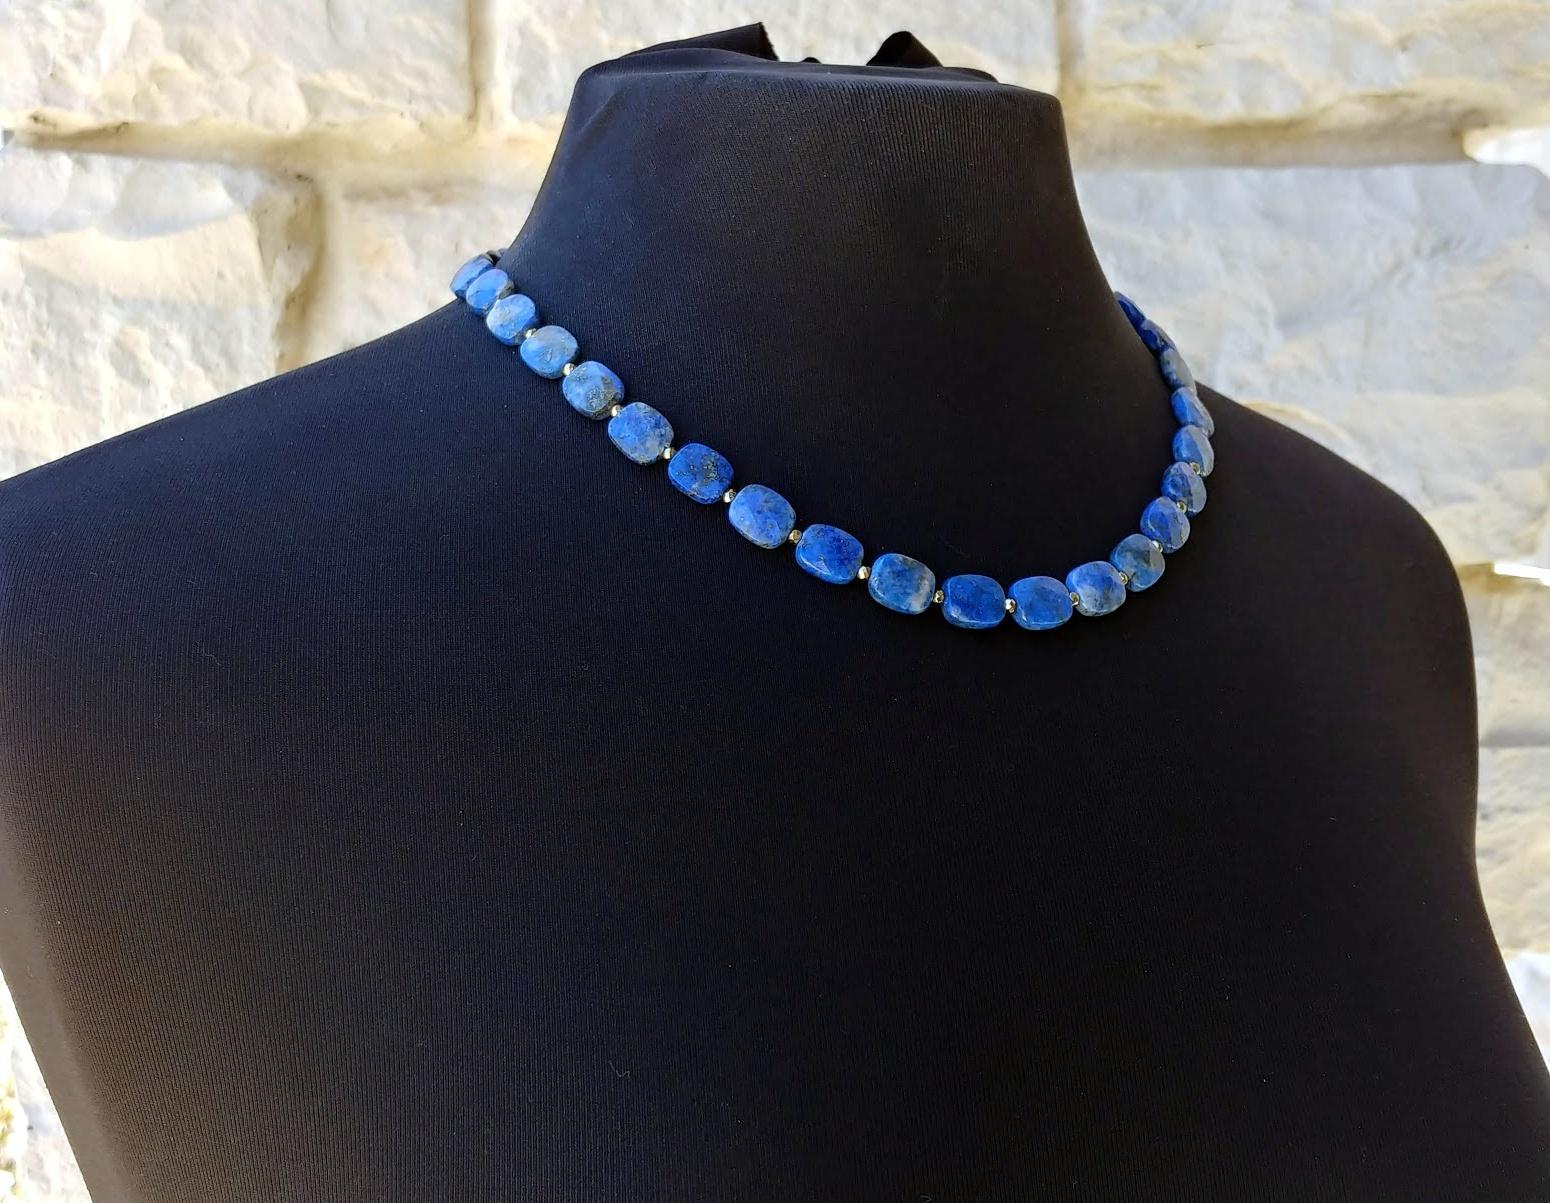 The length of the necklace is 19.5 inches (49.5cm). The size of the faceted beads is 12x10 mm.
The necklace is made of gems in denim blue color, sky blue with inclusions of gold pyrite.
Authentic, natural color. No thermal or other mechanical